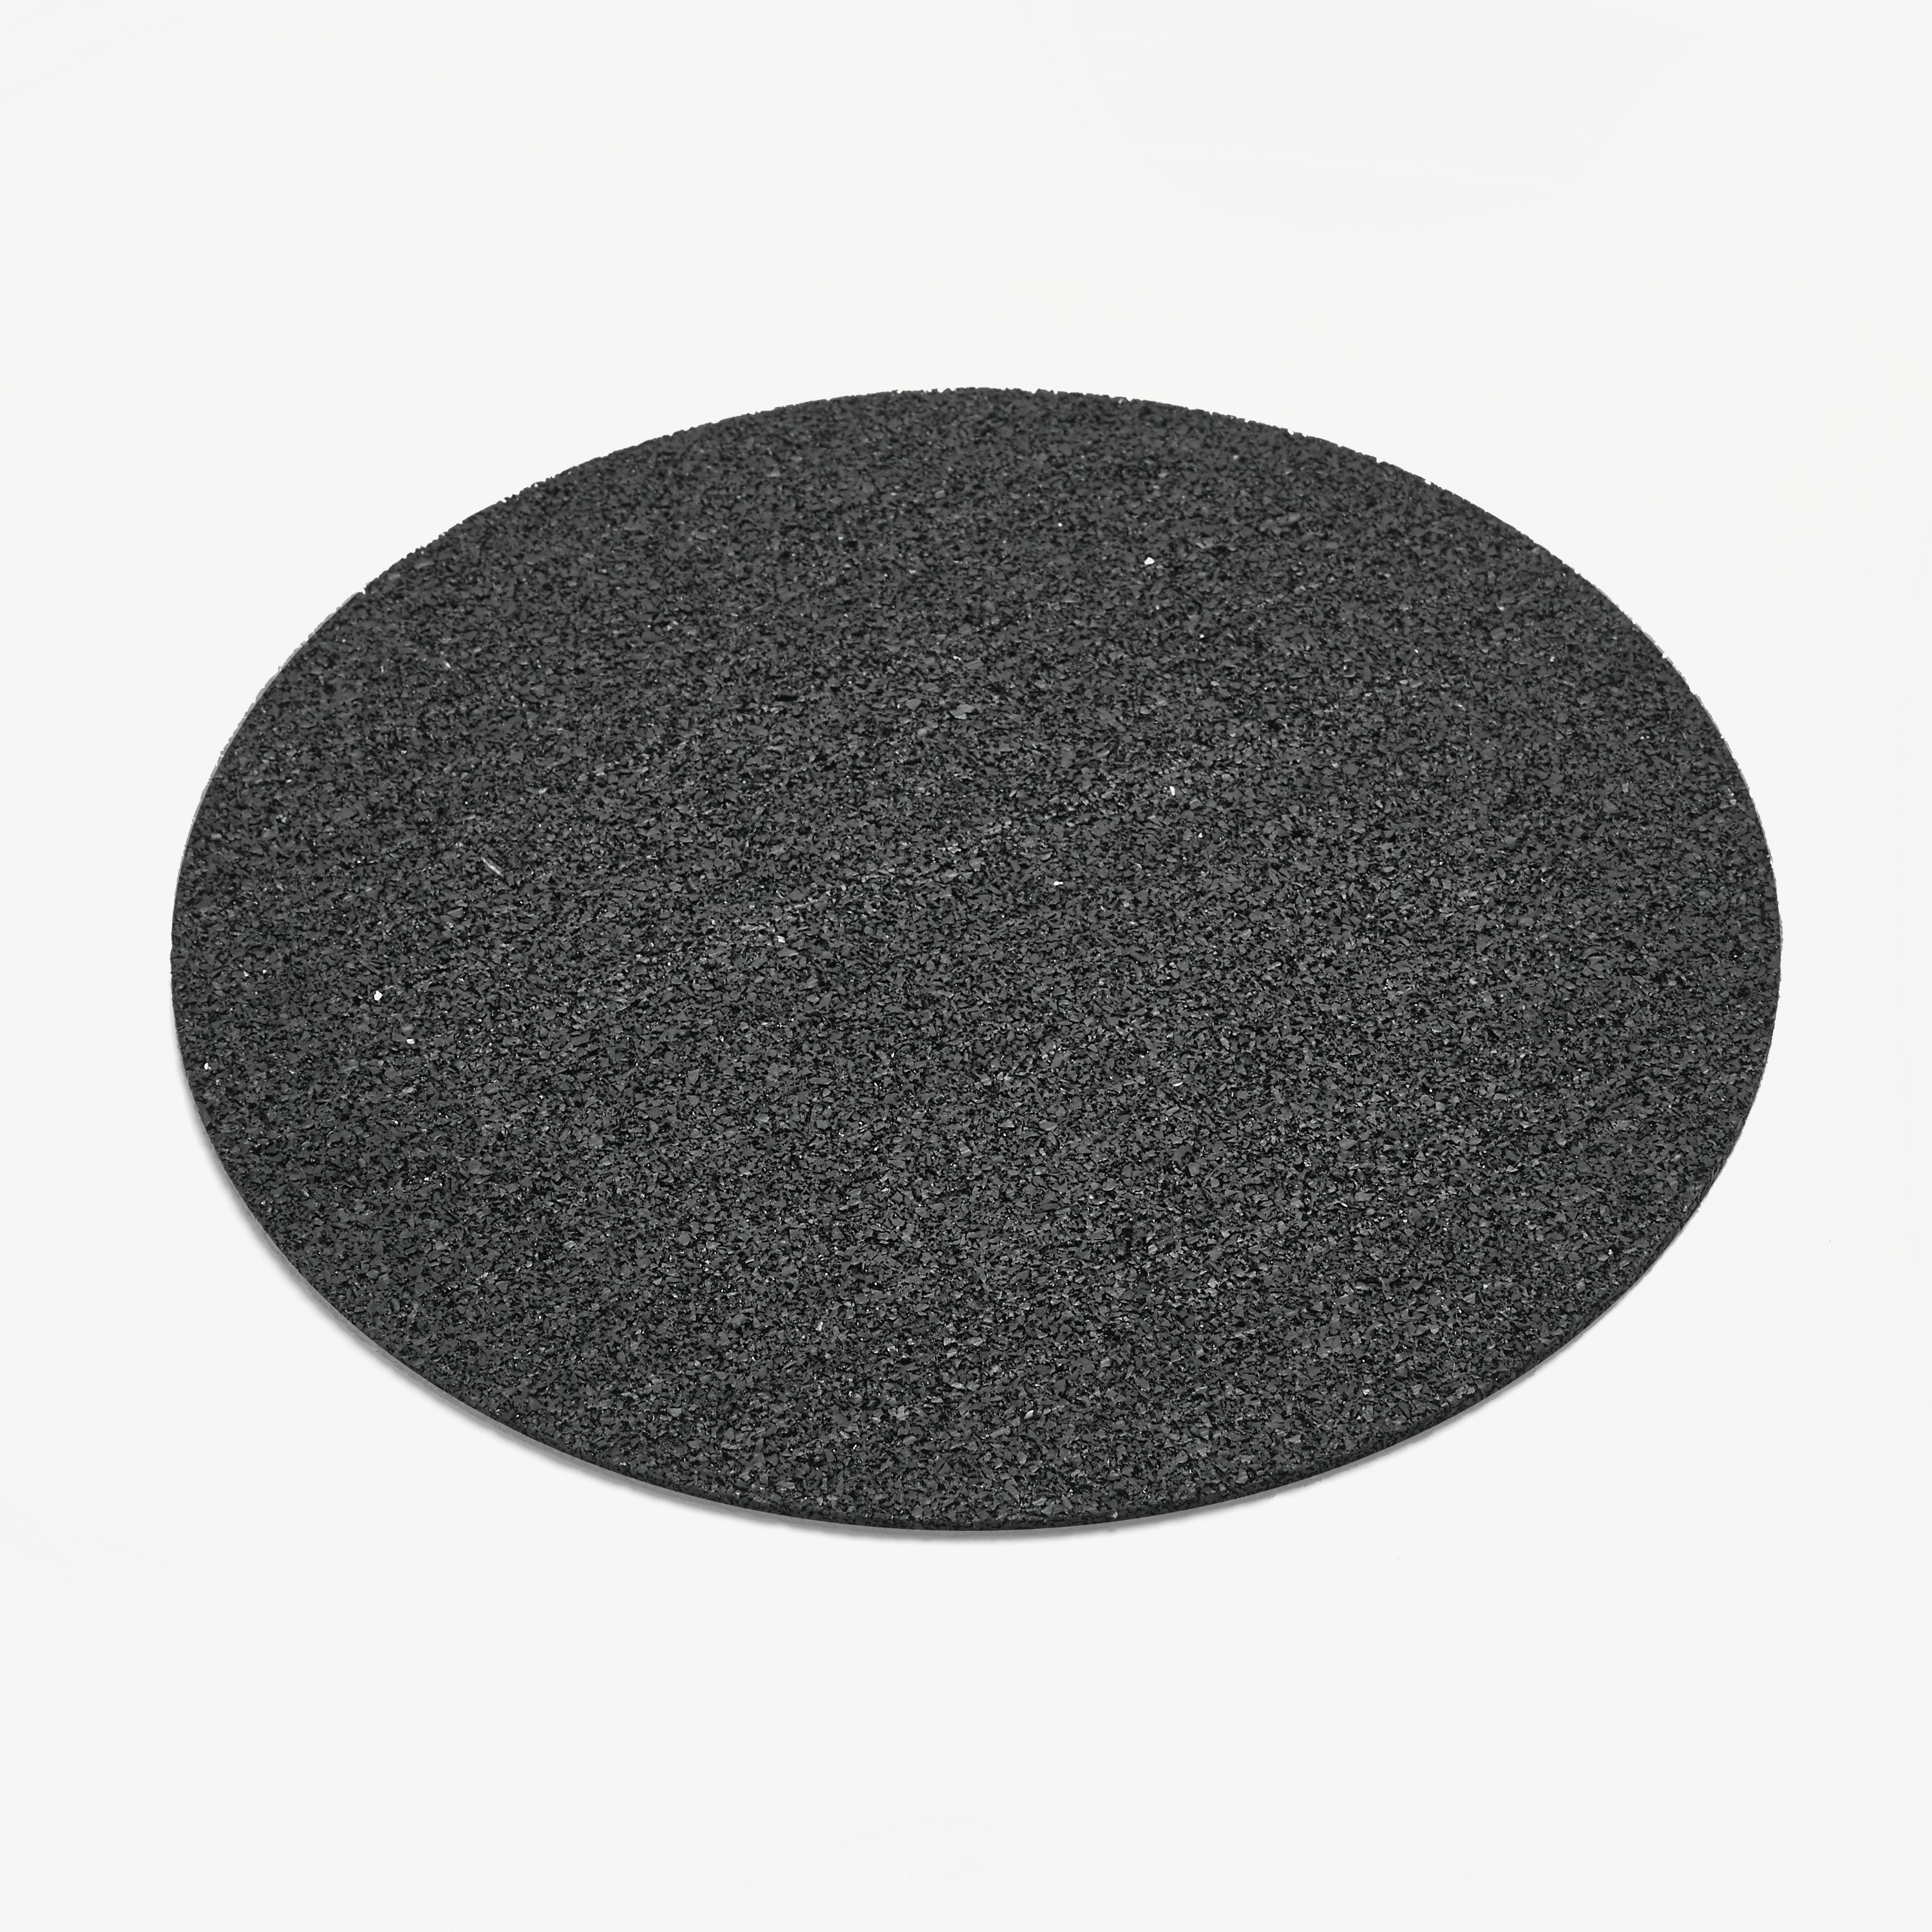 5mm Rubber Support Pads - 5mm